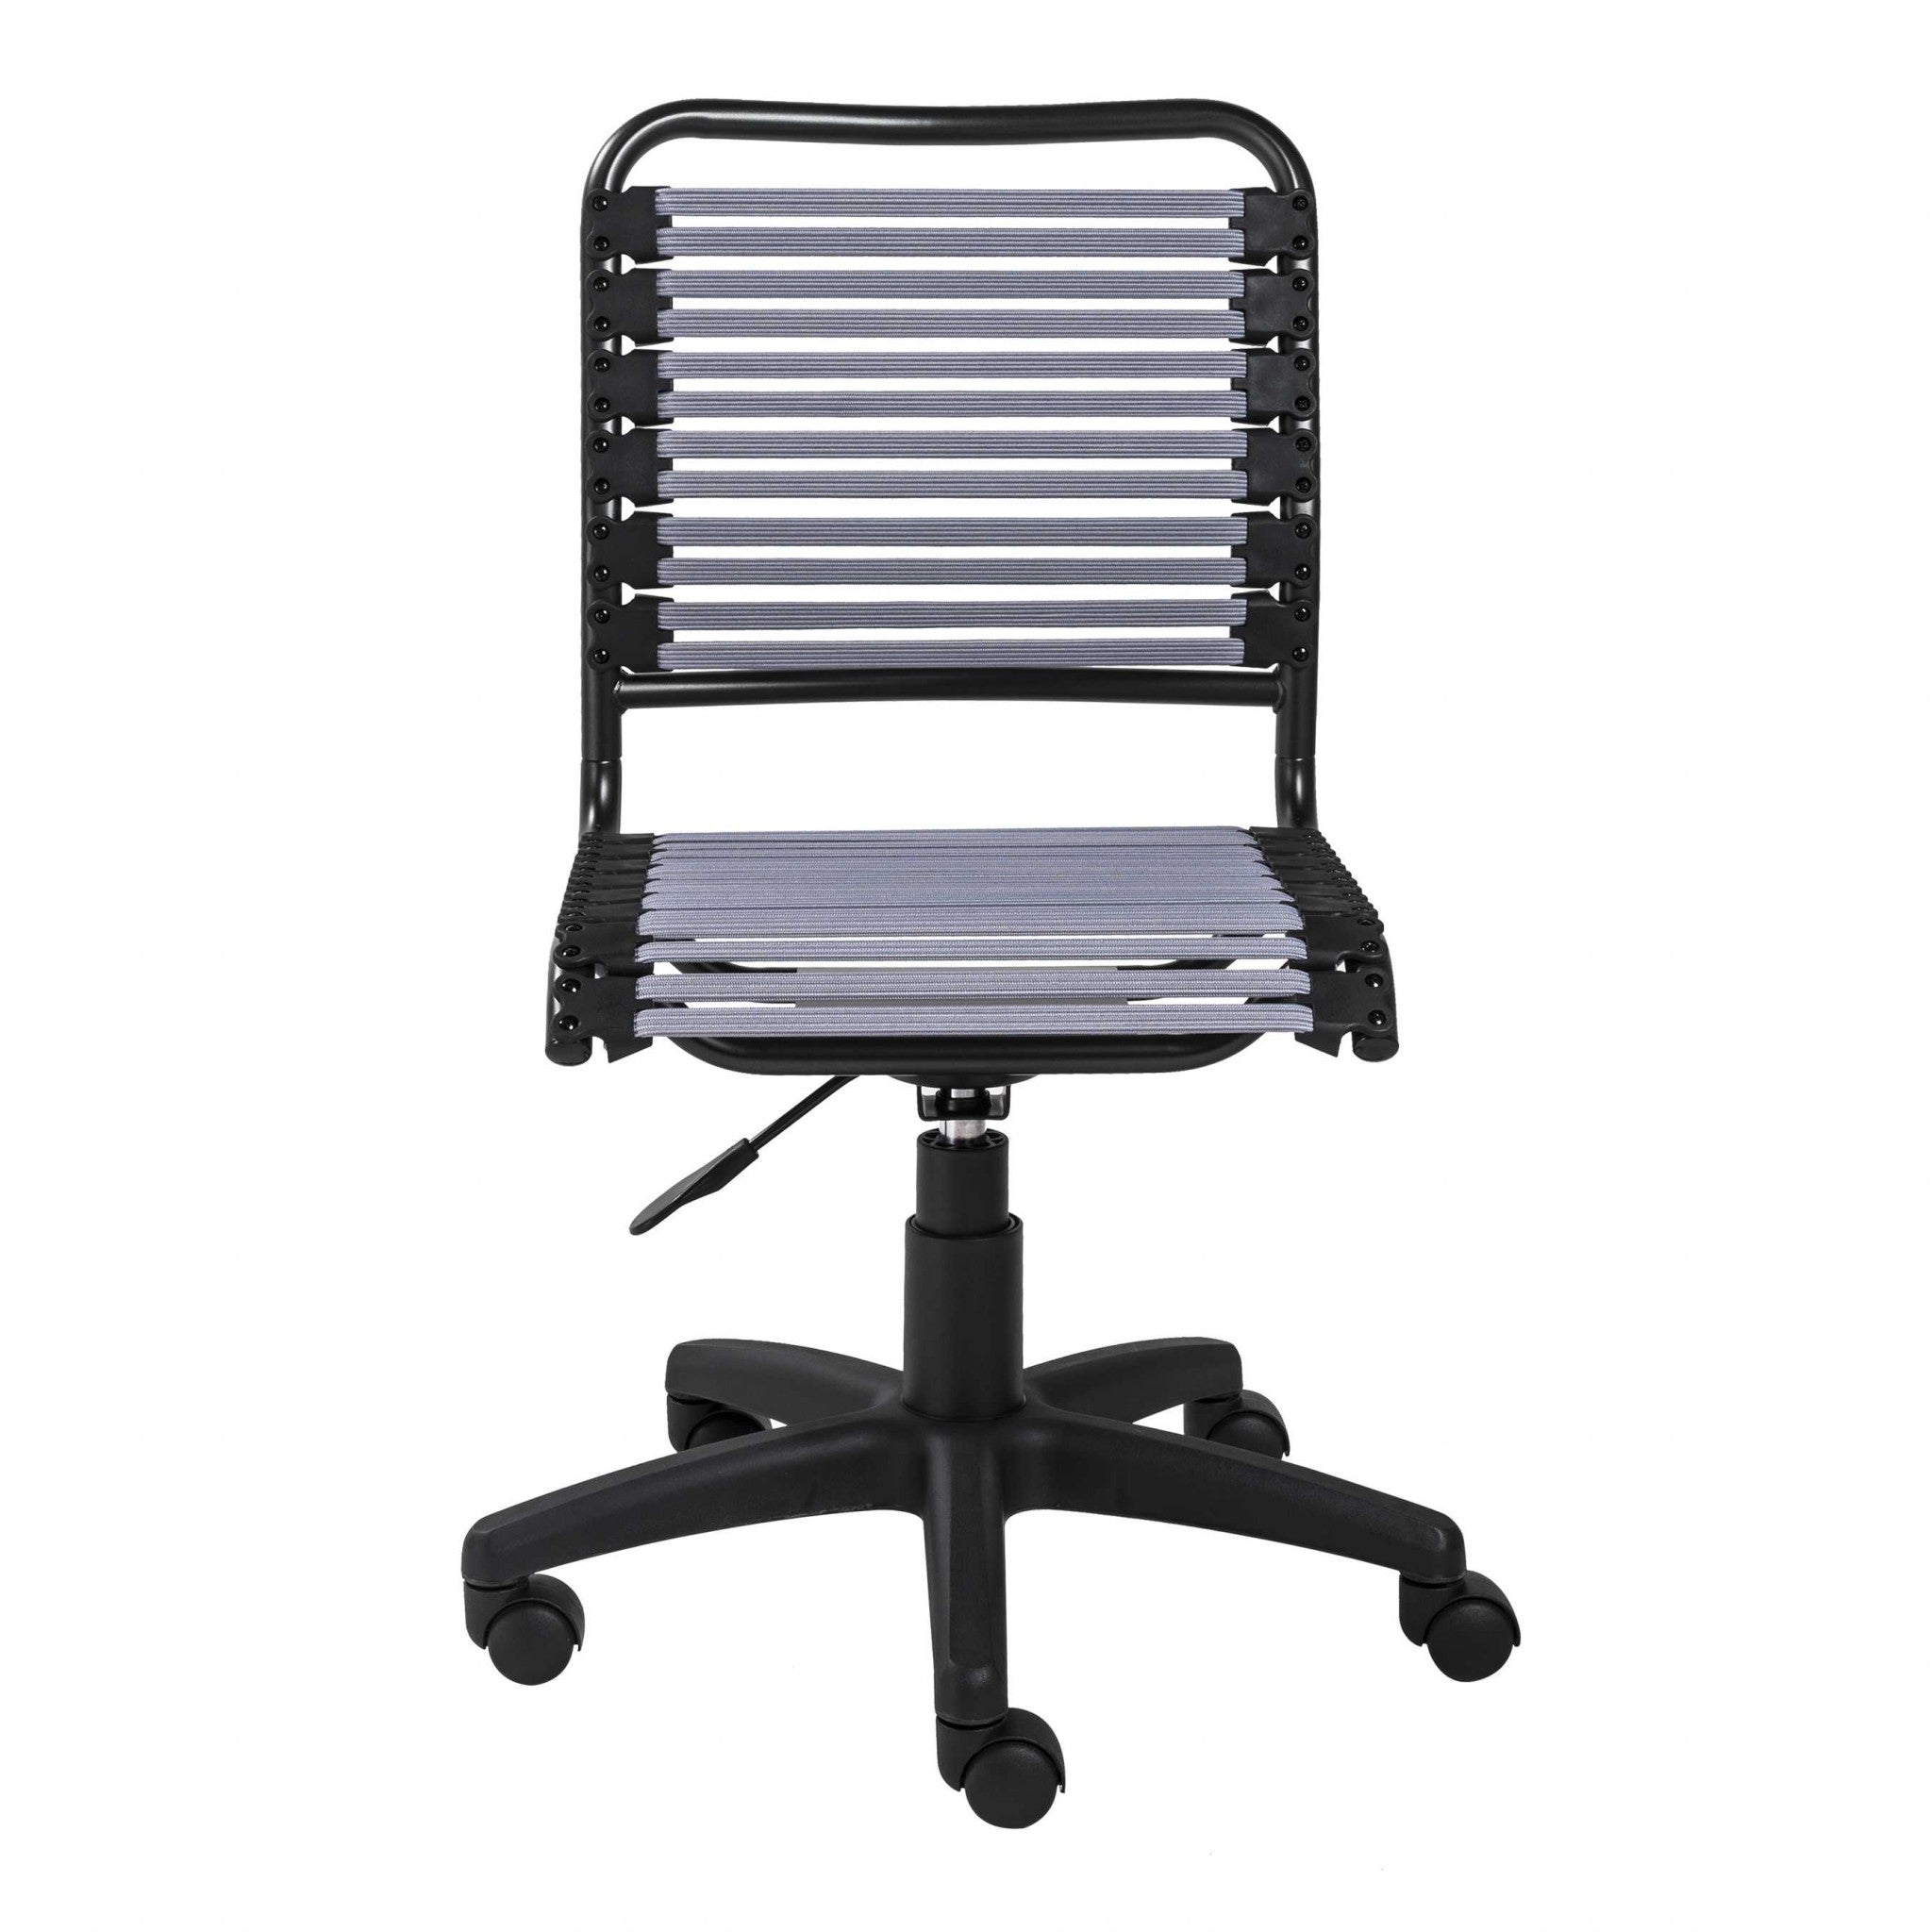 18.12" X 24" X 37.21" Light Gray Flat Bungie Cords Low Back Office Chair with Graphite Black Frame and Base